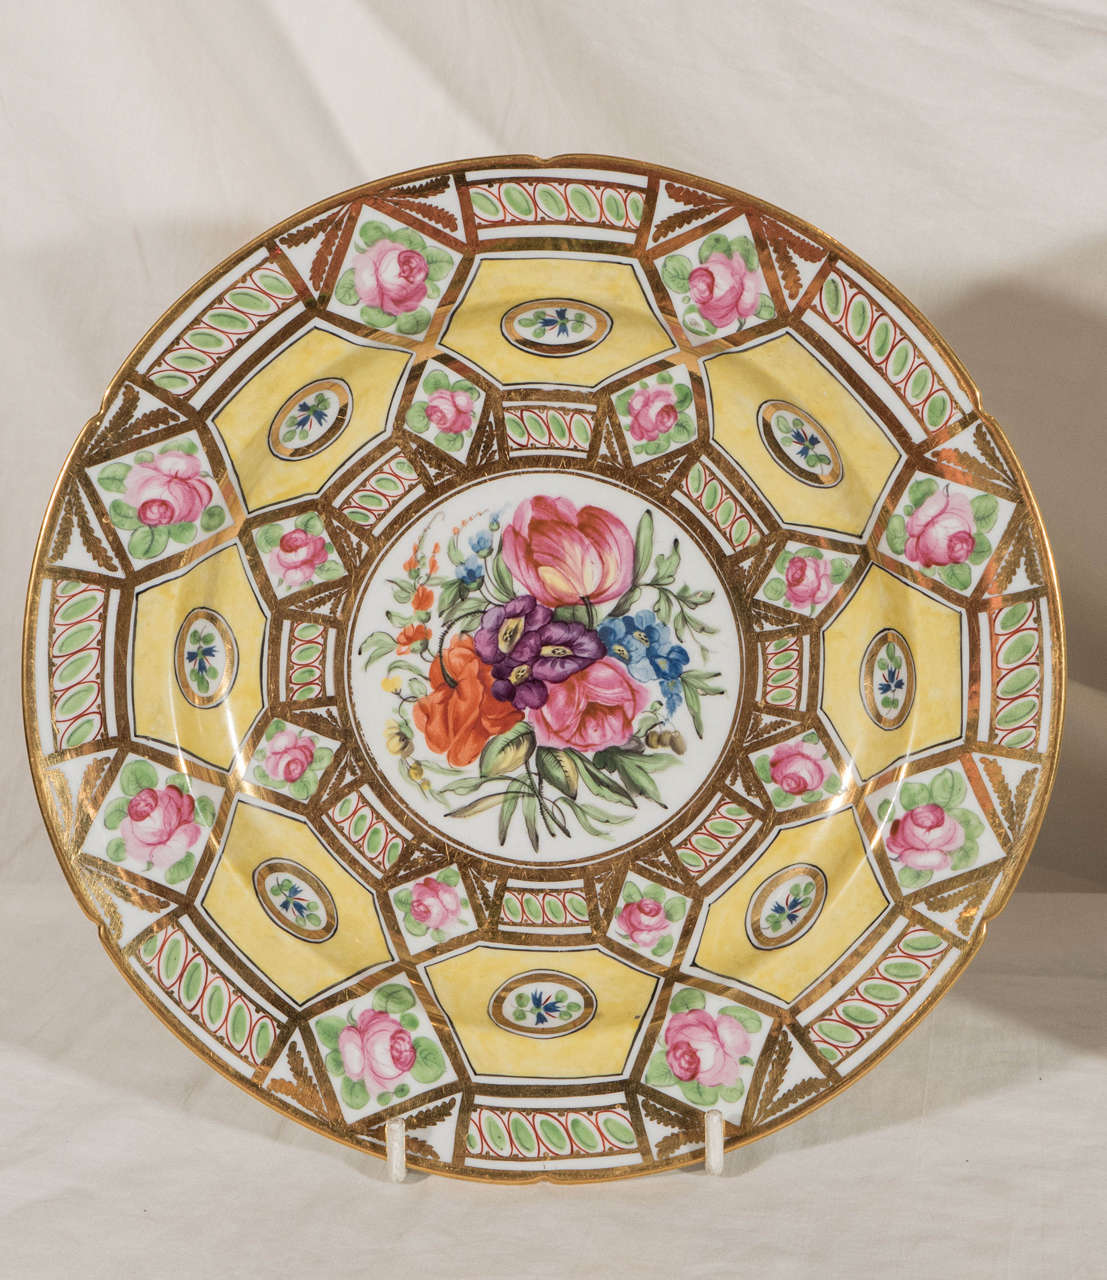 A pair of Regency Period Coalport dishes in the remarkable Church Gresley pattern decorated with yellow ground hexagons, pink roses, green leaves, and exceptional gilding, all surrounding a central roundel painted with beautiful bouquets of flowers.